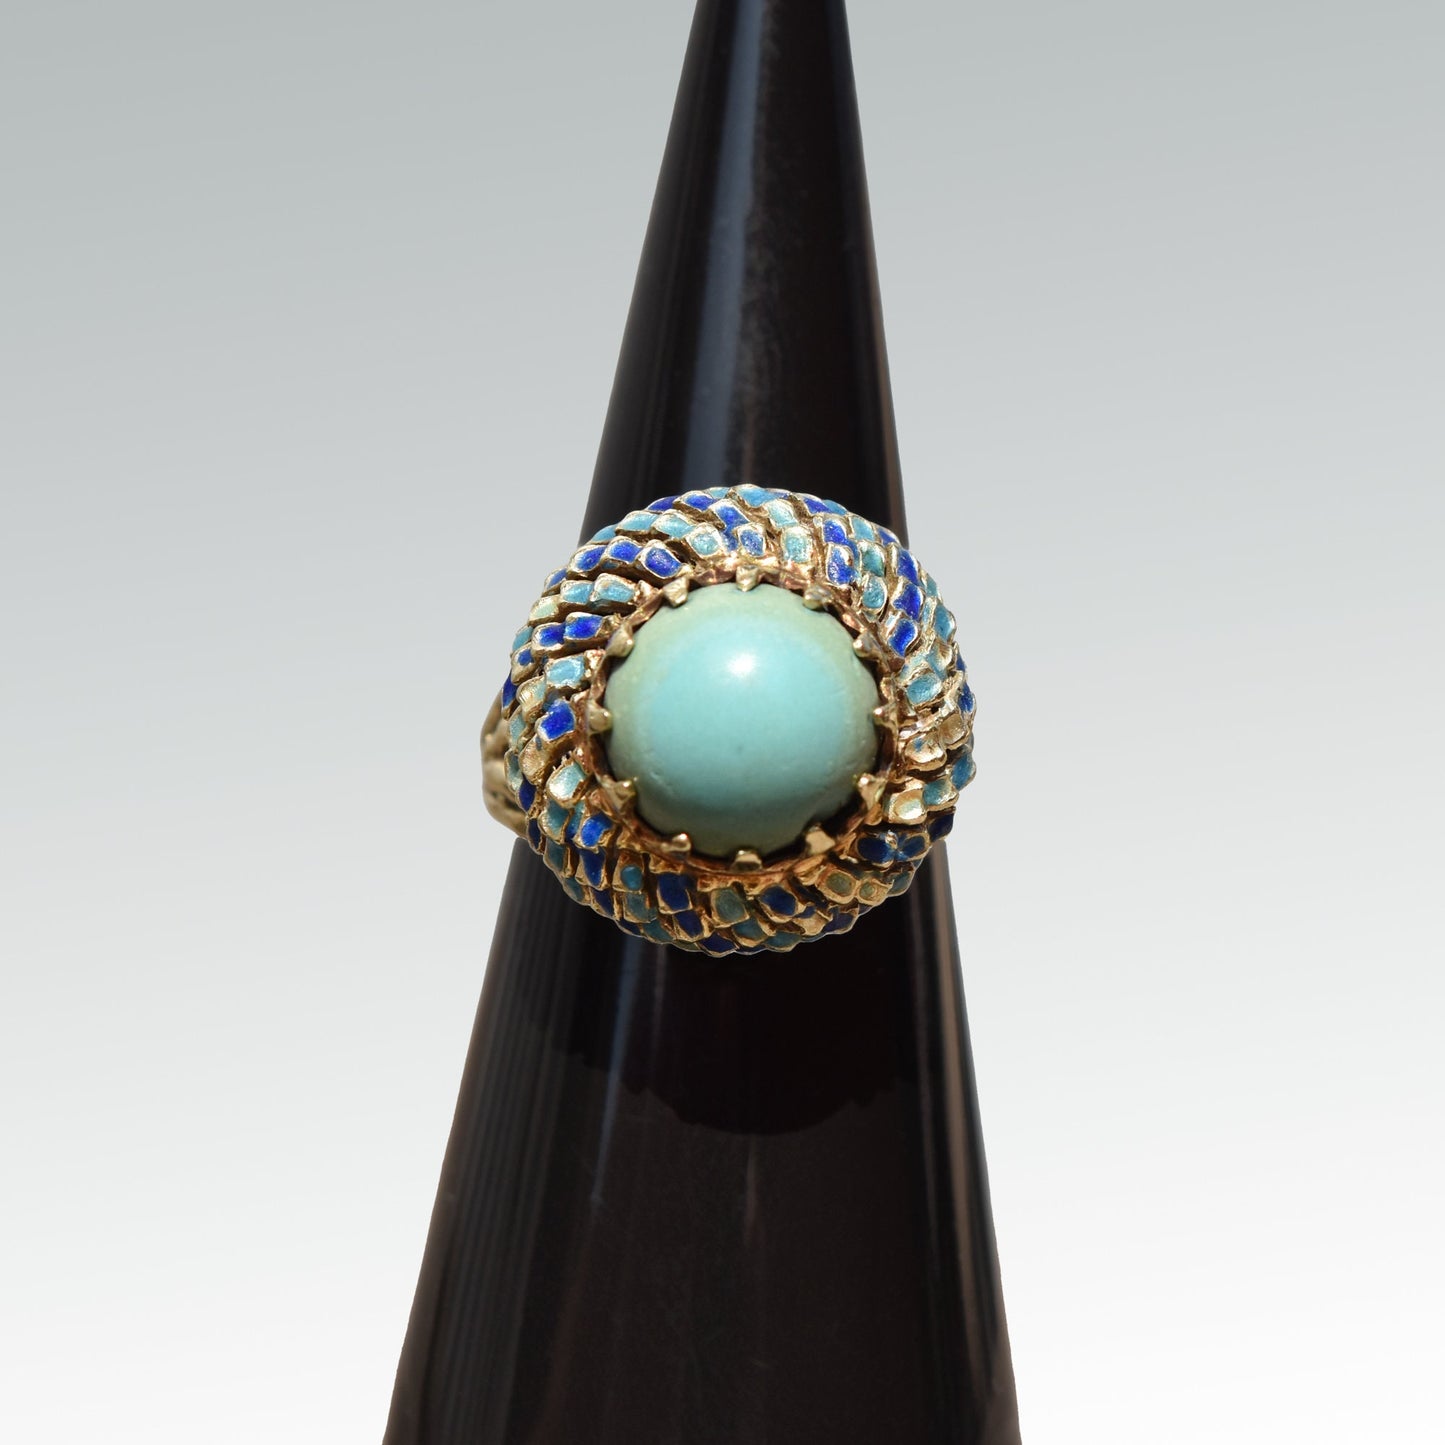 Turquoise Cabochon Enamel Bombe Ring In 14K Yellow Gold, Blue Scale Design, Estate Jewelry, 6 1/2 US